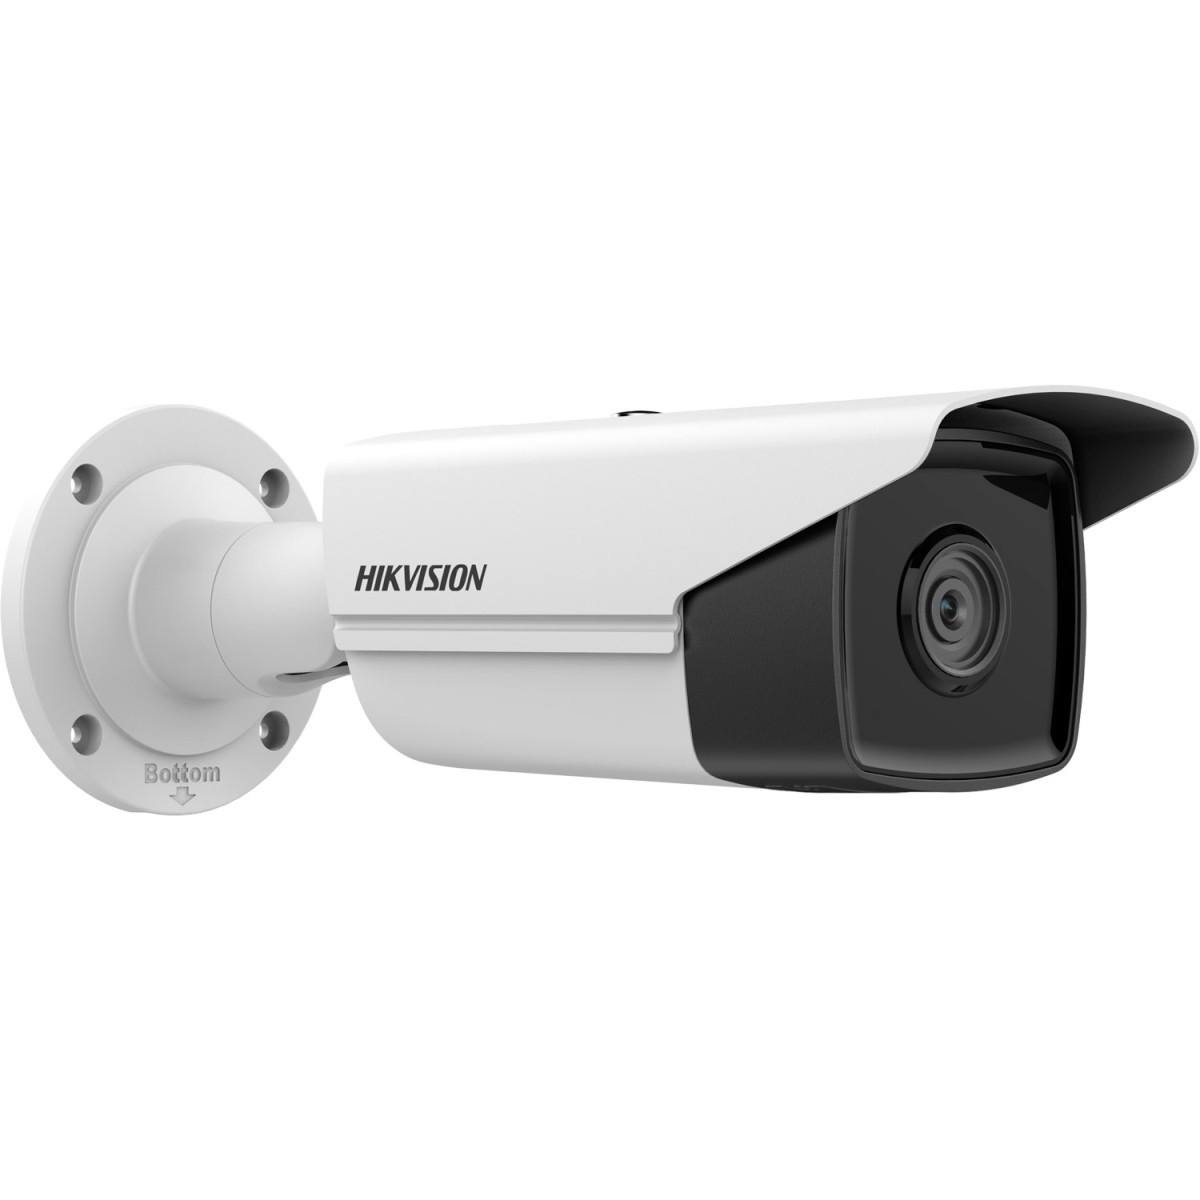 IP-камера Hikvision DS-2CD2T23G2-2I (4.0) 98_98.jpg - фото 2